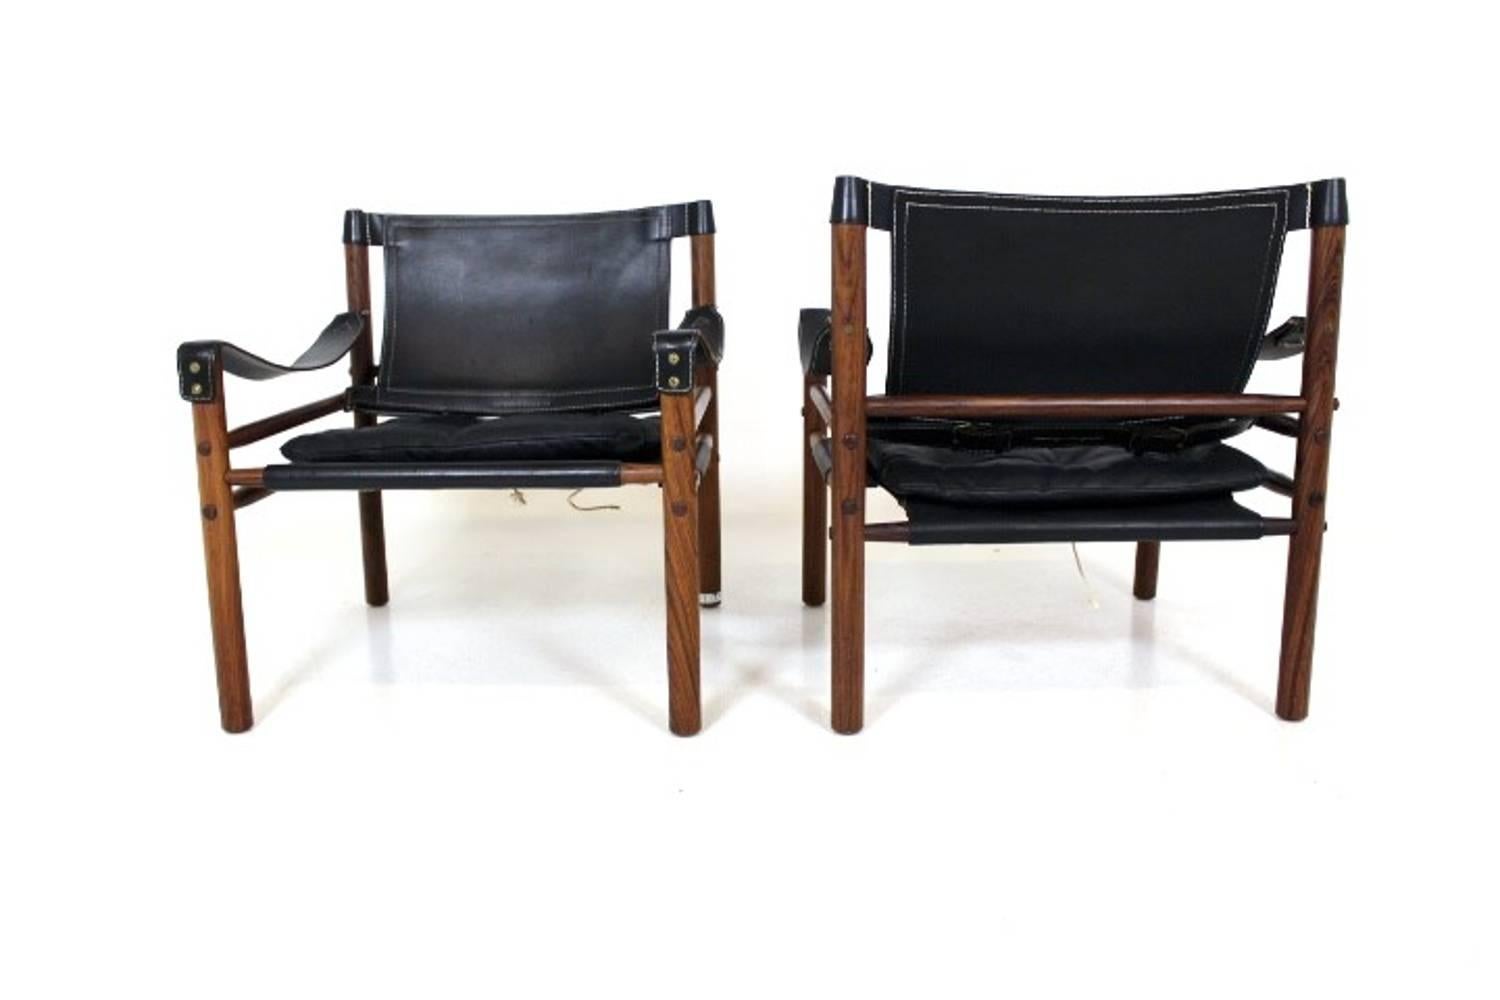 Scandinavian Modern Pair of Sirocco Safari Chair by Arne Norell in Rosewood and Black Leather